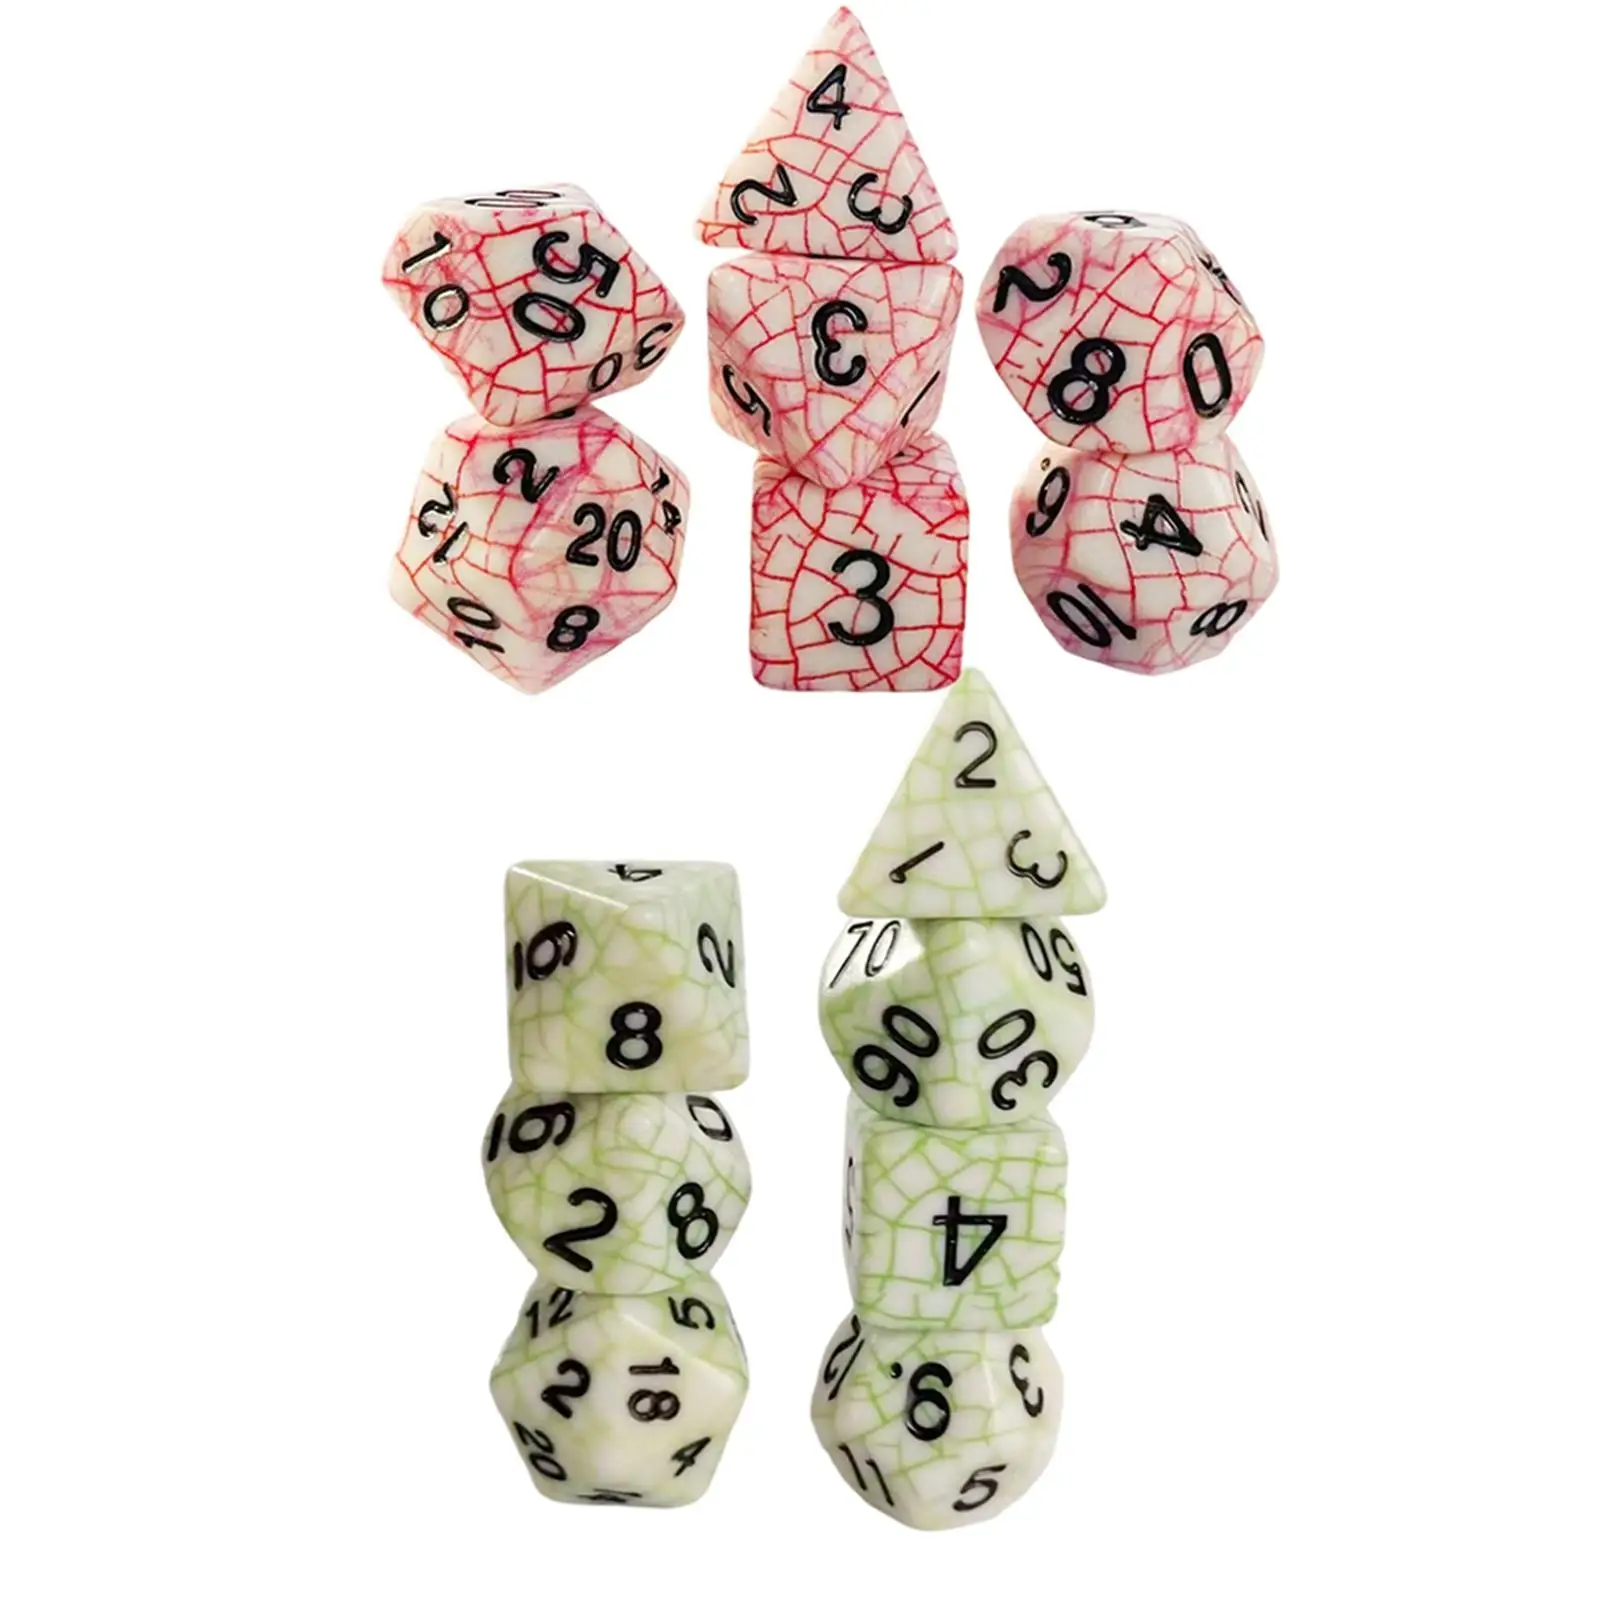 7x Polyhedral Dice, D20 D12 D10 D10% D8 D6 D4, Multi Sided Dice Set, D4-D20 Die for DND RPG MTG Entertainment Roleplaying